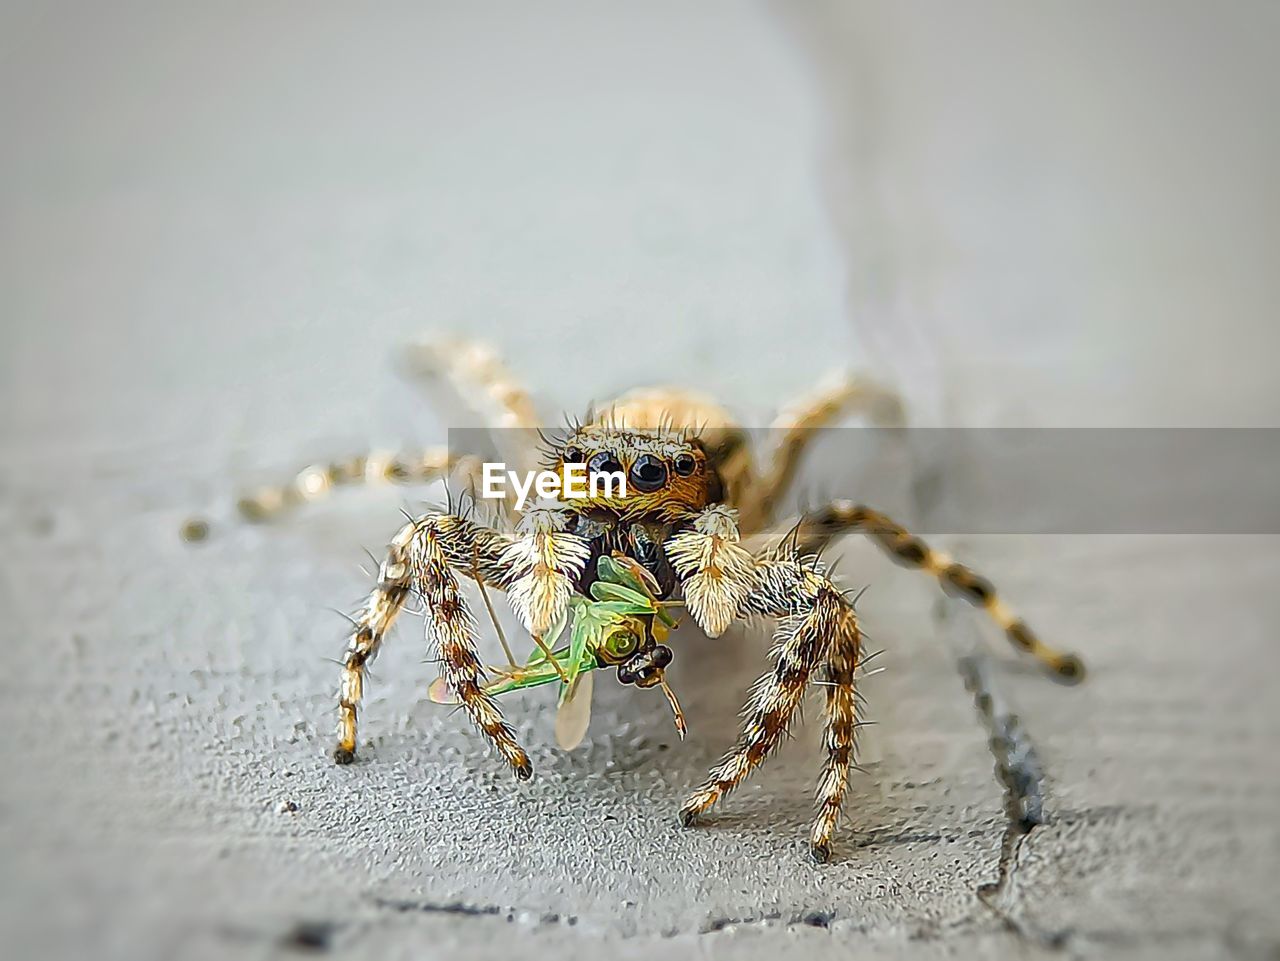 CLOSE-UP OF SPIDER ON A TABLE